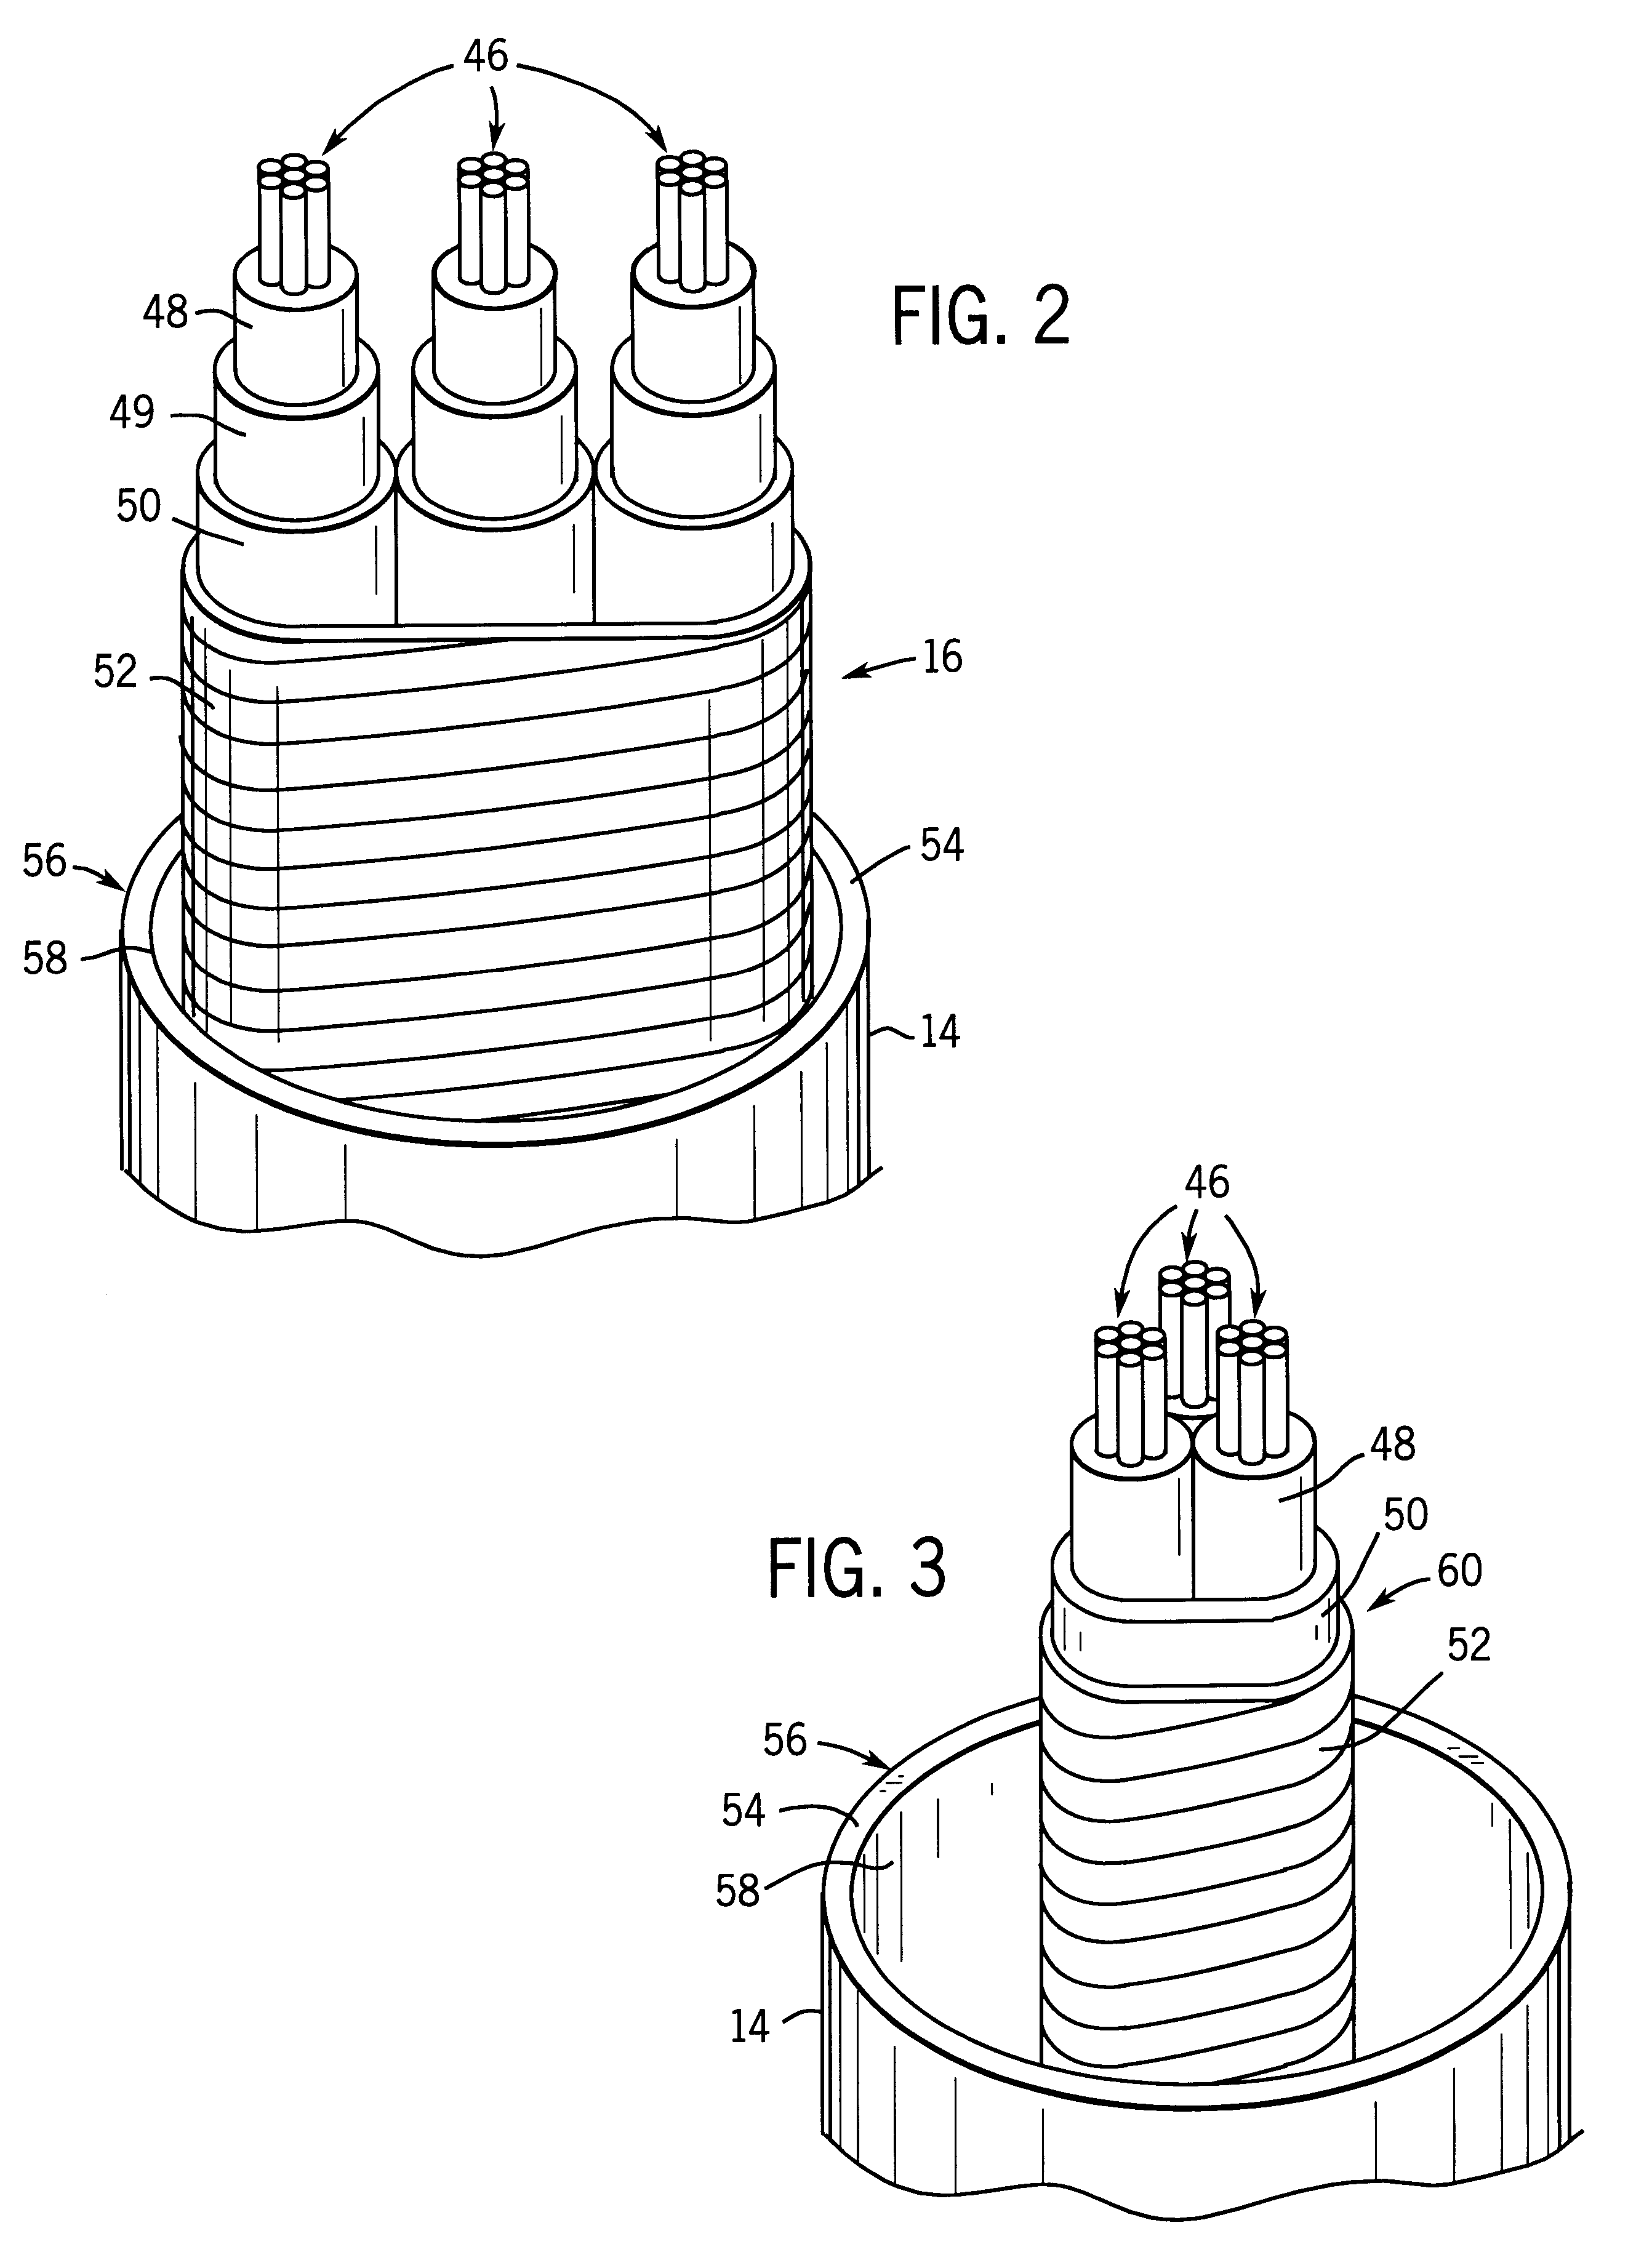 Method and apparatus for installing a cable into coiled tubing